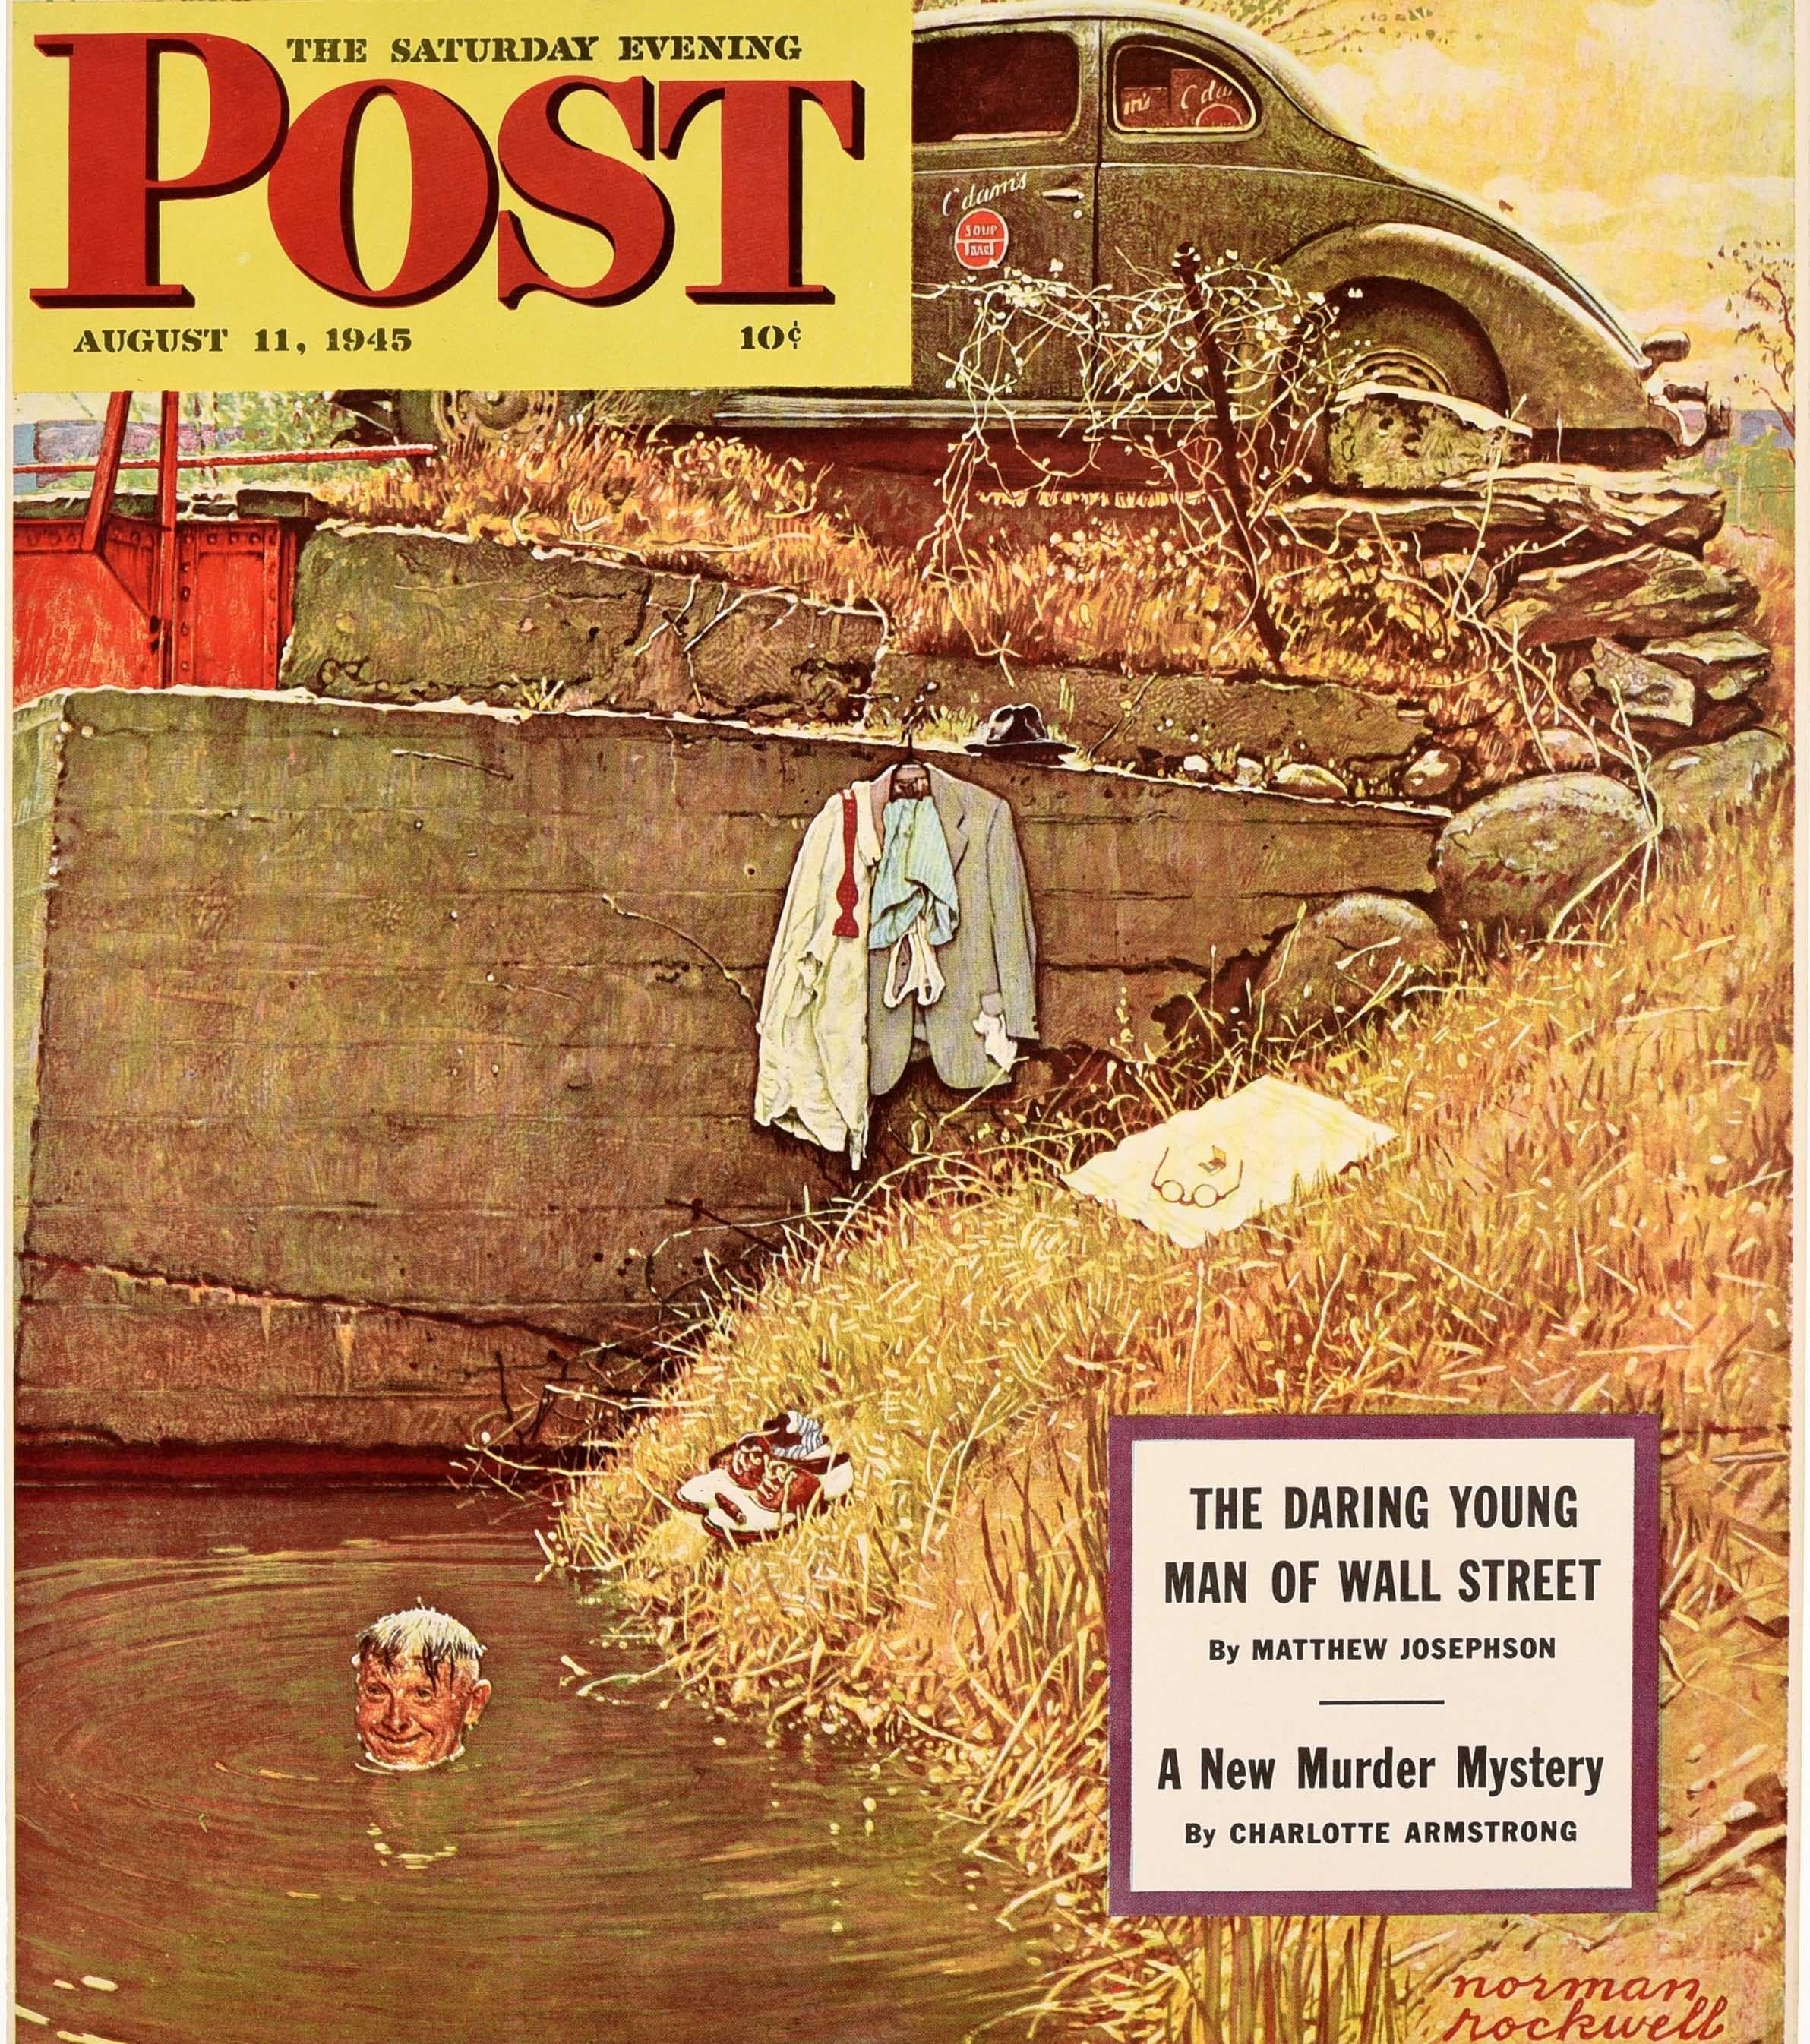 Mid-20th Century Original Vintage Poster For The Saturday Evening Post Swimming Hole Cover Art